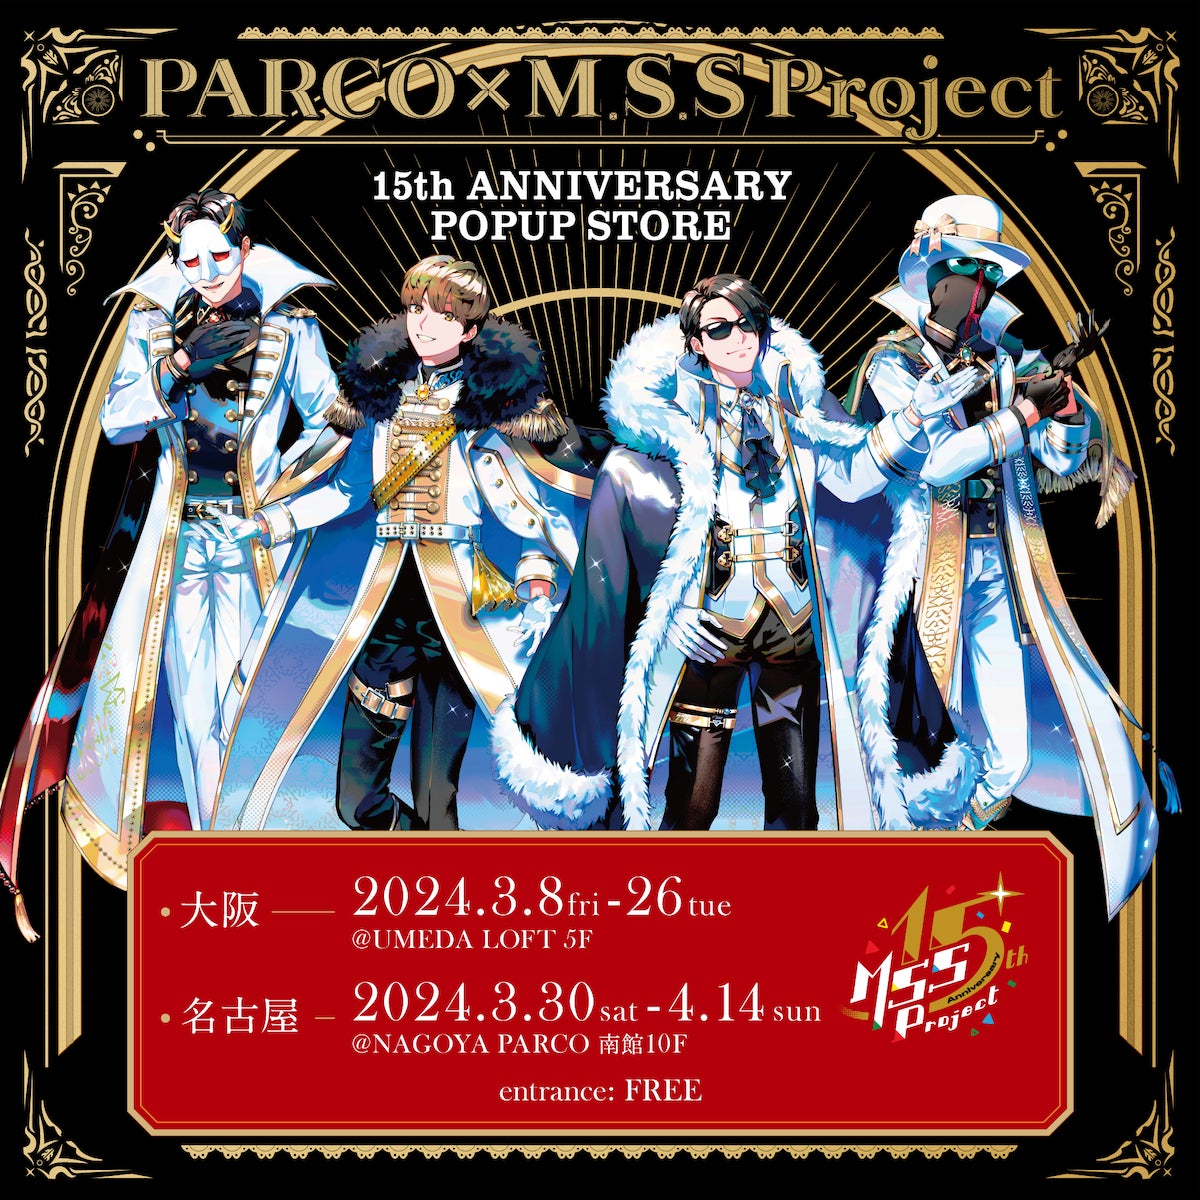 『PARCO×M.S.S Project 15th ANNIVERSARY POPUP STORE』​大好評につき、大阪・名古屋にて巡回開催決定！​人気投票で上位になった過去衣装も展示！